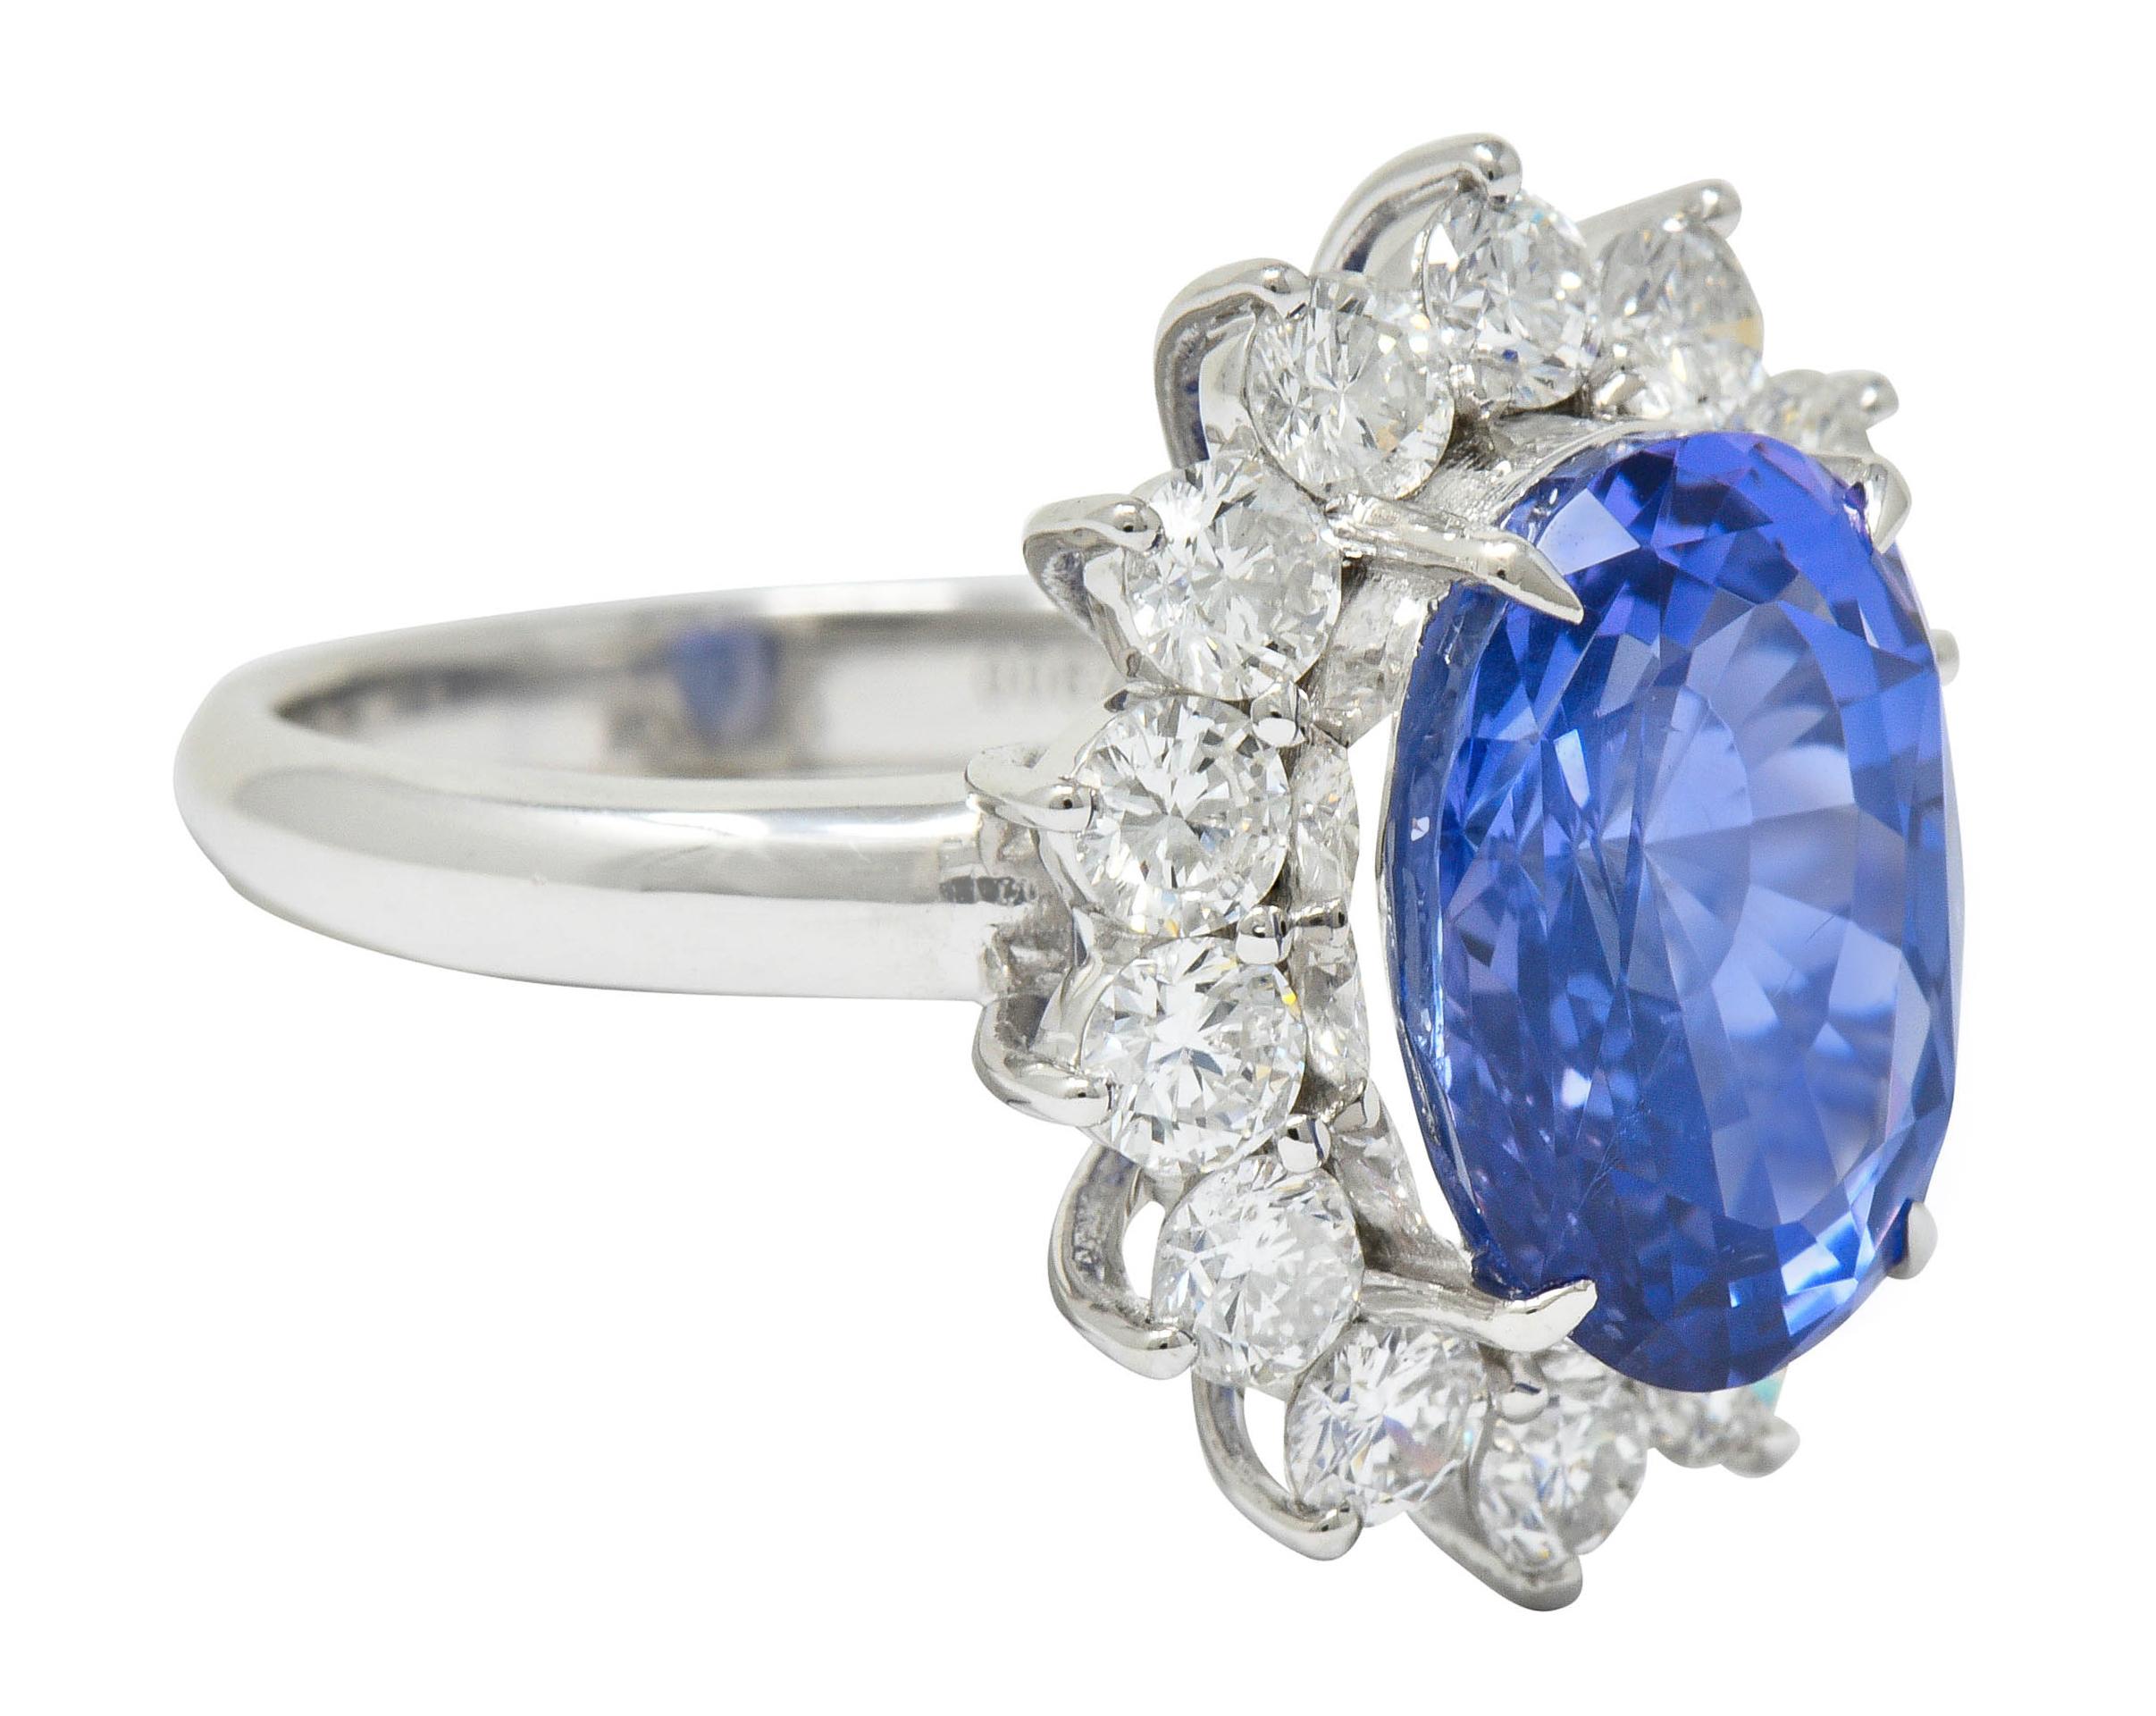 Cluster style ring centers an oval cut Ceylon sapphire weighing 7.72 carats

Cornflower blue in color with no indications of heat and is Sri Lankan in origin

Surrounded by round brilliant cut diamonds weighing in total 1.91 carats; F/G color with